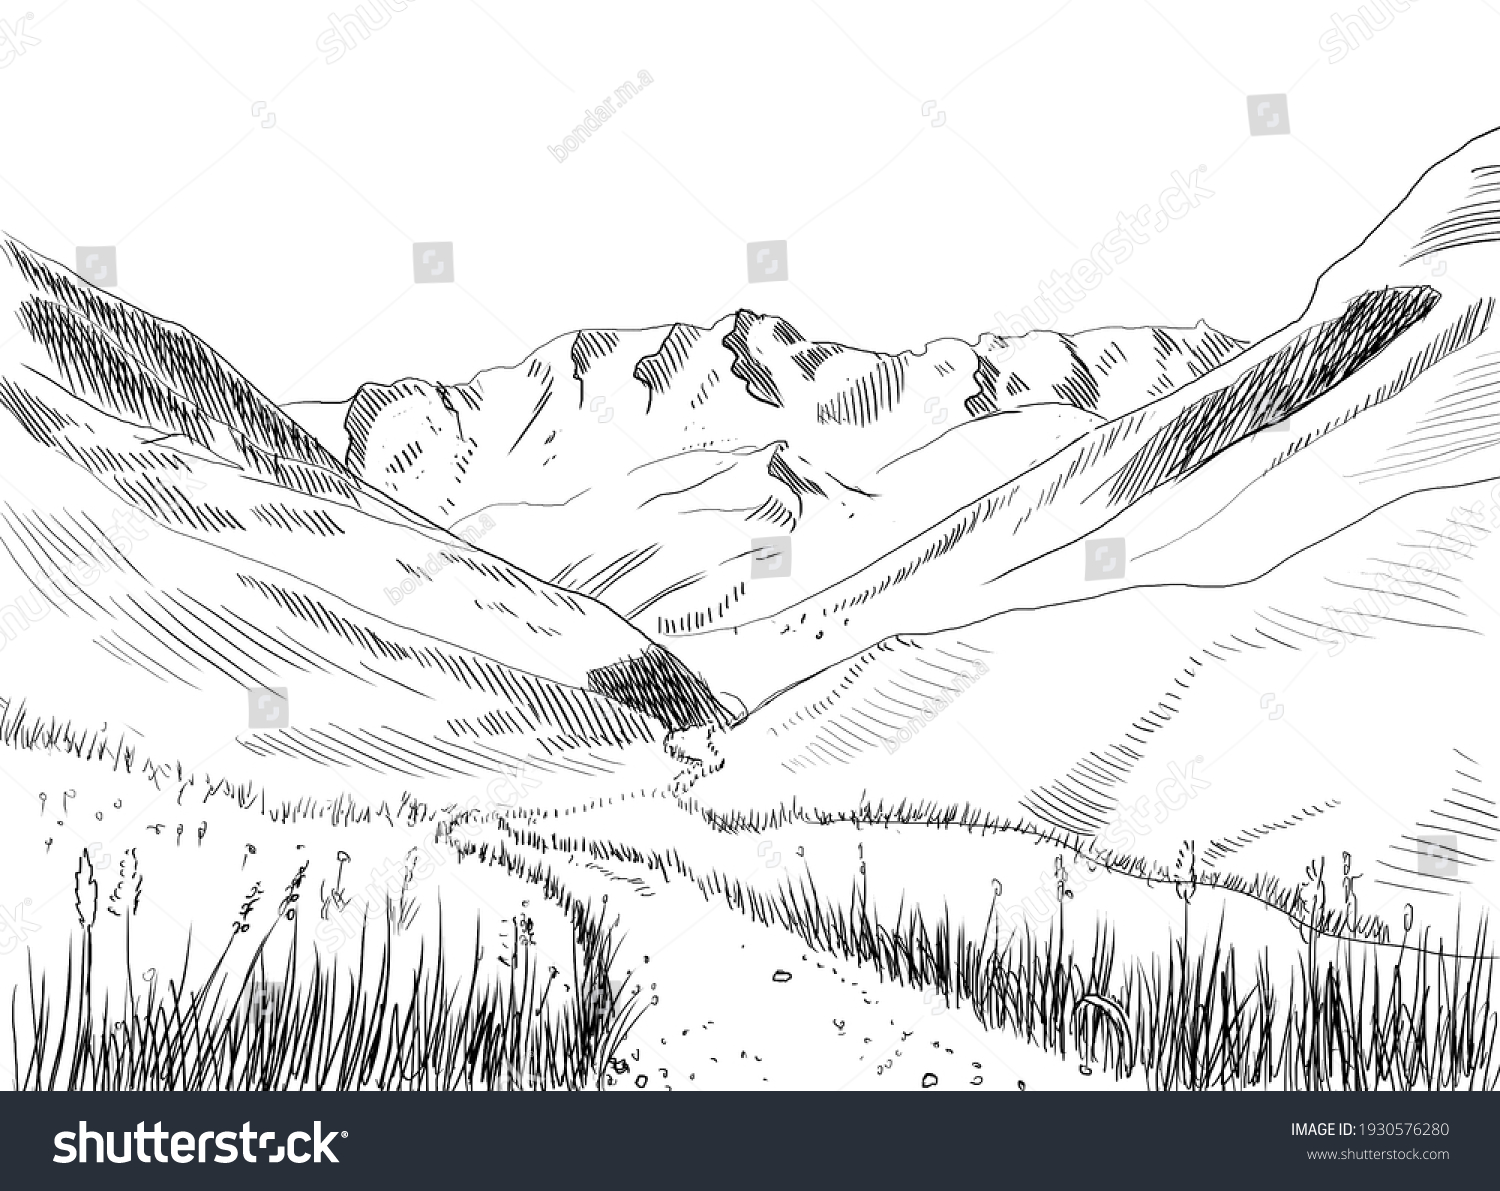 36,190 Black and white mountain drawings Images, Stock Photos & Vectors ...